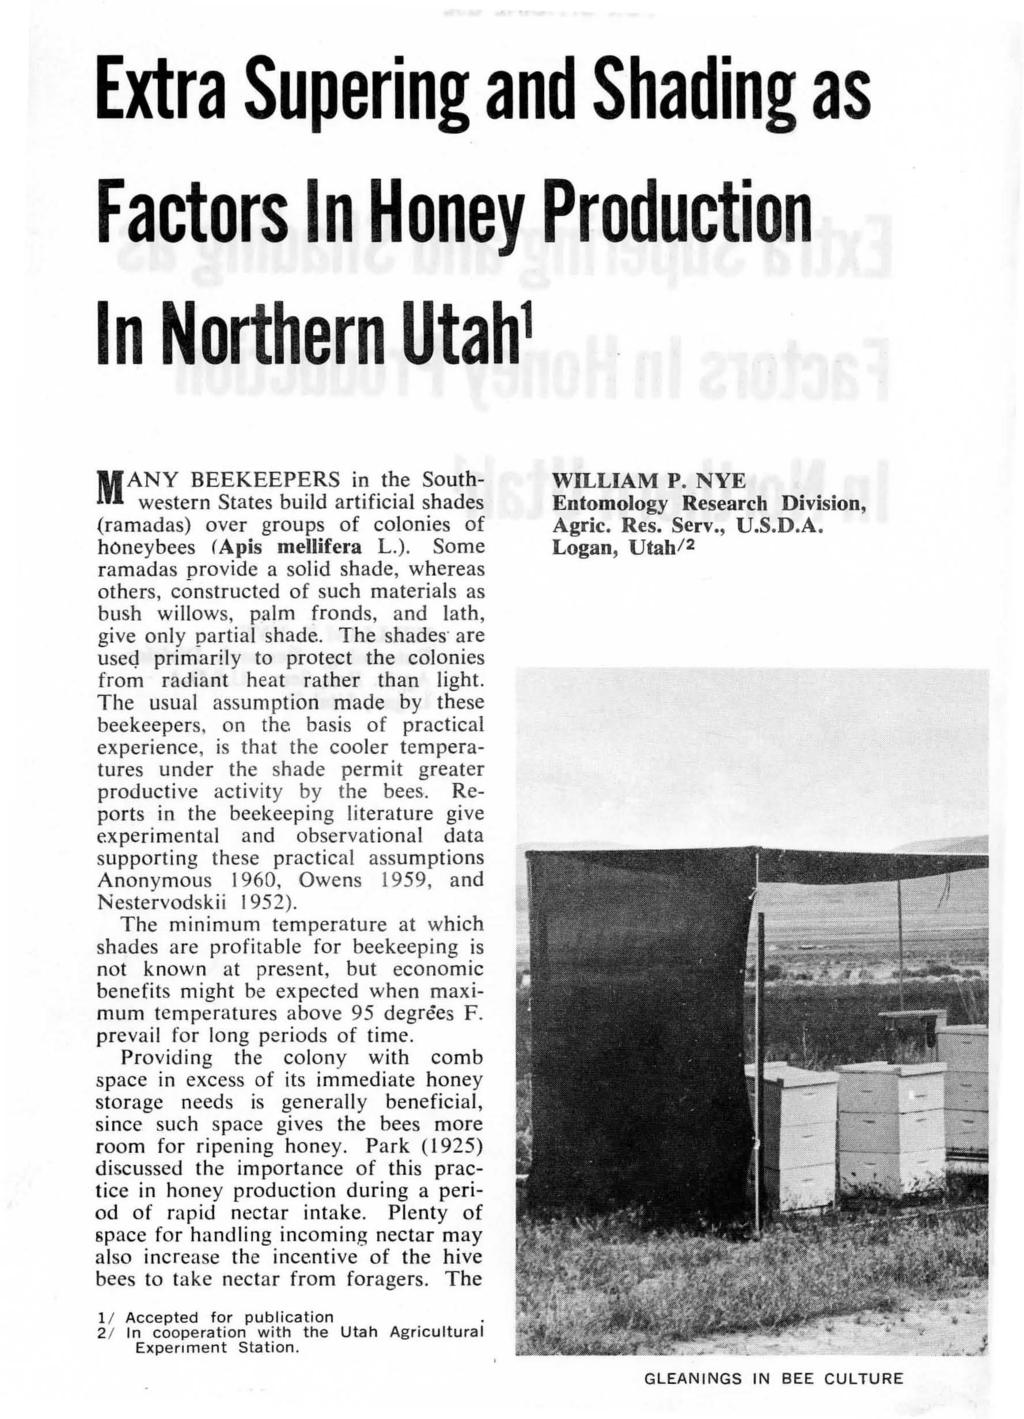 Extra Supering and Shading as Factors In Honey Production In Northern Utah 1 ANY BEEKEEPERS in the Southwestern States build artificial shades M (ramadas) over groups of colonies of honeybees (Apis